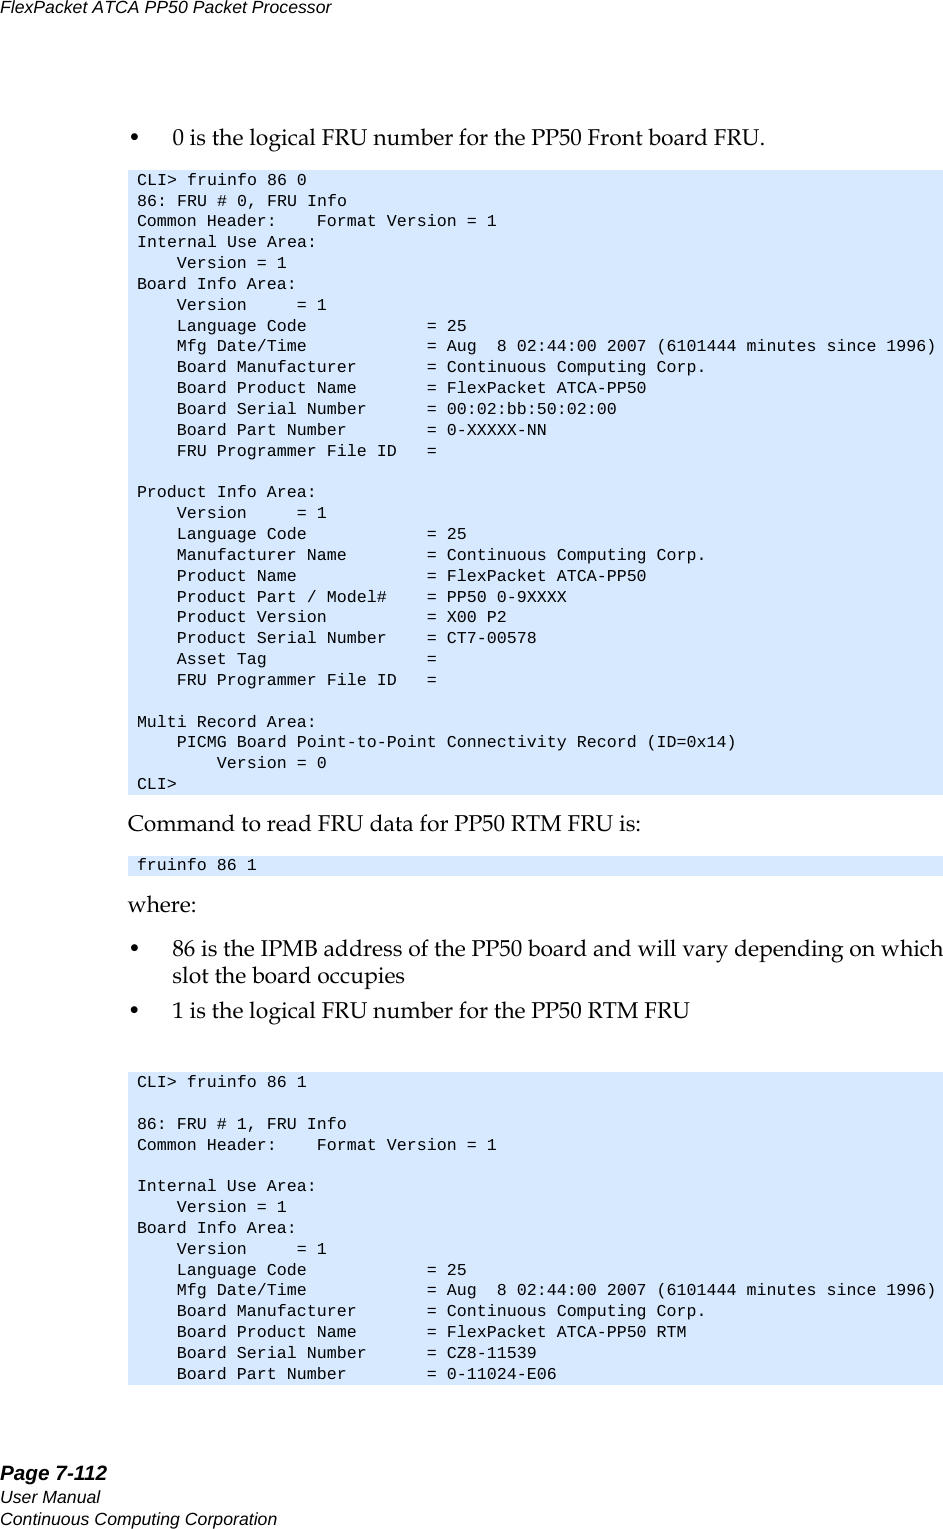 Page 7-112User ManualContinuous Computing CorporationFlexPacket ATCA PP50 Packet Processor     Preliminary• 0 is the logical FRU number for the PP50 Front board FRU.Command to read FRU data for PP50 RTM FRU is:where:• 86 is the IPMB address of the PP50 board and will vary depending on which slot the board occupies• 1 is the logical FRU number for the PP50 RTM FRUCLI&gt; fruinfo 86 086: FRU # 0, FRU InfoCommon Header:    Format Version = 1Internal Use Area:    Version = 1Board Info Area:    Version     = 1    Language Code            = 25    Mfg Date/Time            = Aug  8 02:44:00 2007 (6101444 minutes since 1996)    Board Manufacturer       = Continuous Computing Corp.    Board Product Name       = FlexPacket ATCA-PP50    Board Serial Number      = 00:02:bb:50:02:00    Board Part Number        = 0-XXXXX-NN    FRU Programmer File ID   = Product Info Area:    Version     = 1    Language Code            = 25    Manufacturer Name        = Continuous Computing Corp.    Product Name             = FlexPacket ATCA-PP50    Product Part / Model#    = PP50 0-9XXXX    Product Version          = X00 P2    Product Serial Number    = CT7-00578    Asset Tag                =     FRU Programmer File ID   = Multi Record Area:    PICMG Board Point-to-Point Connectivity Record (ID=0x14)        Version = 0CLI&gt; fruinfo 86 1CLI&gt; fruinfo 86 186: FRU # 1, FRU InfoCommon Header:    Format Version = 1Internal Use Area:    Version = 1Board Info Area:    Version     = 1    Language Code            = 25    Mfg Date/Time            = Aug  8 02:44:00 2007 (6101444 minutes since 1996)    Board Manufacturer       = Continuous Computing Corp.    Board Product Name       = FlexPacket ATCA-PP50 RTM    Board Serial Number      = CZ8-11539    Board Part Number        = 0-11024-E06